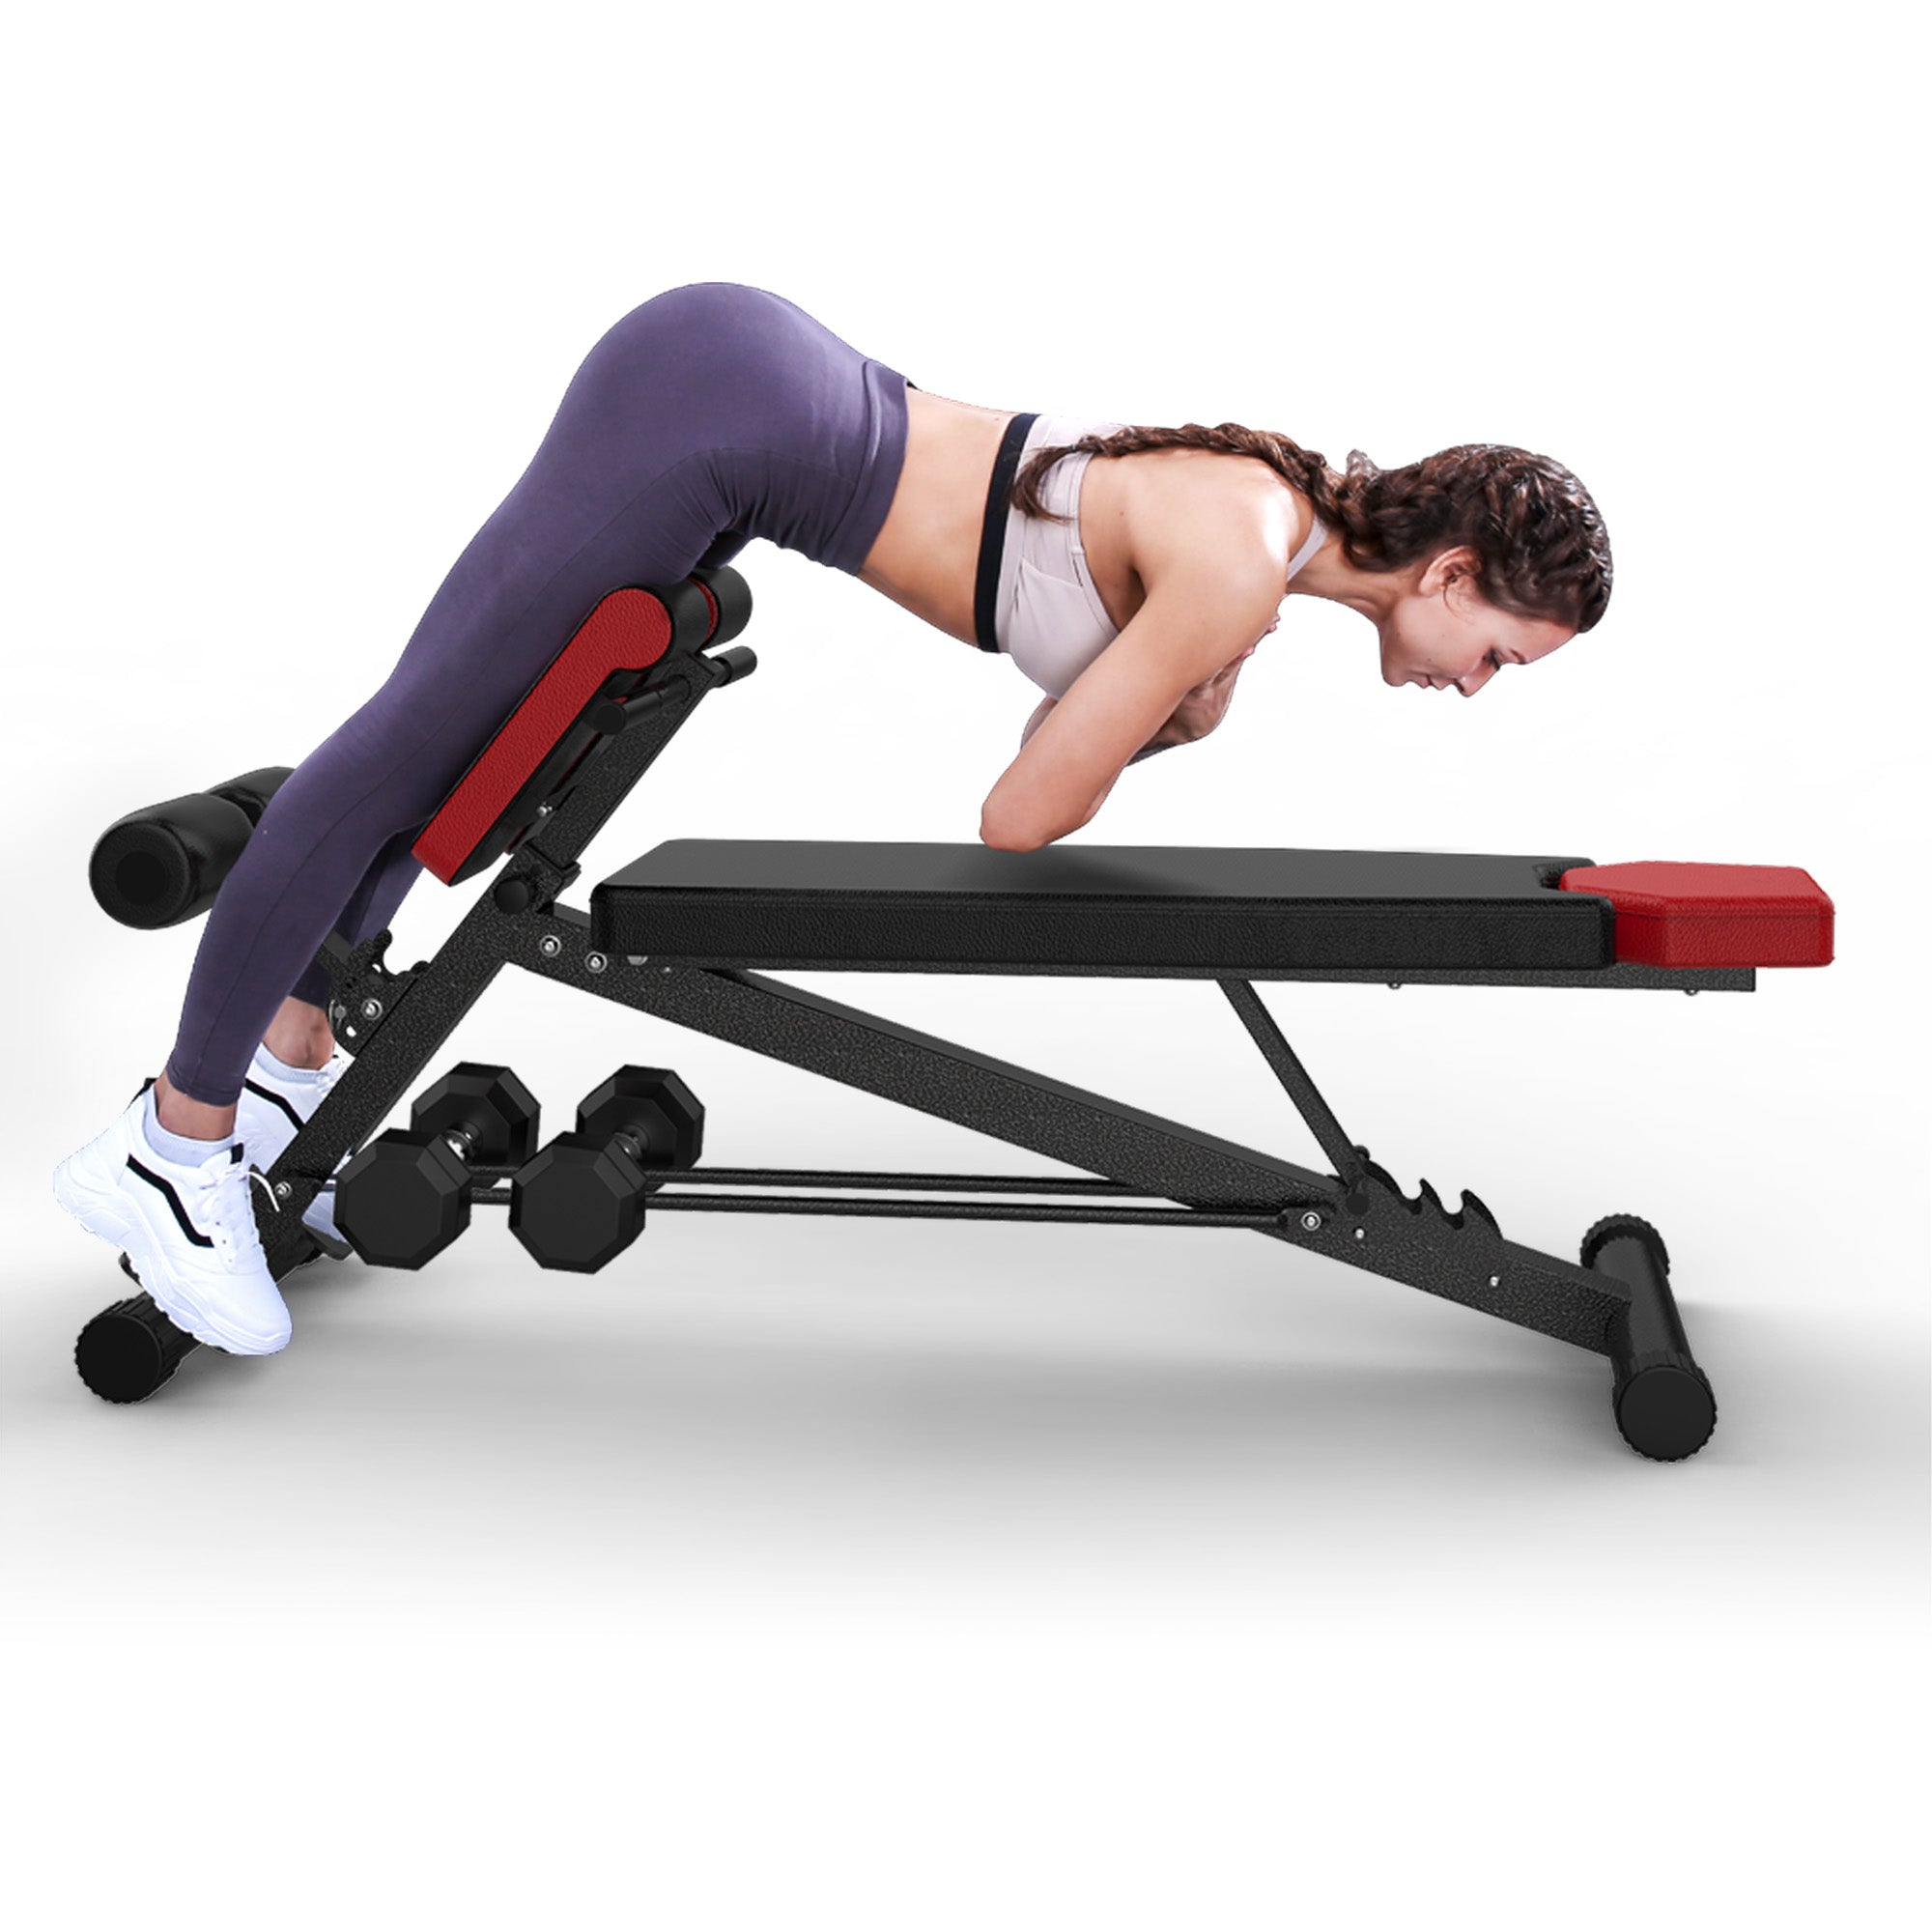 Finer Form Multi-Functional Bench for Full All-in-One Body Workout –  Versatile Exercise Equipment for Hyper Back Extension, Abdominal Routines